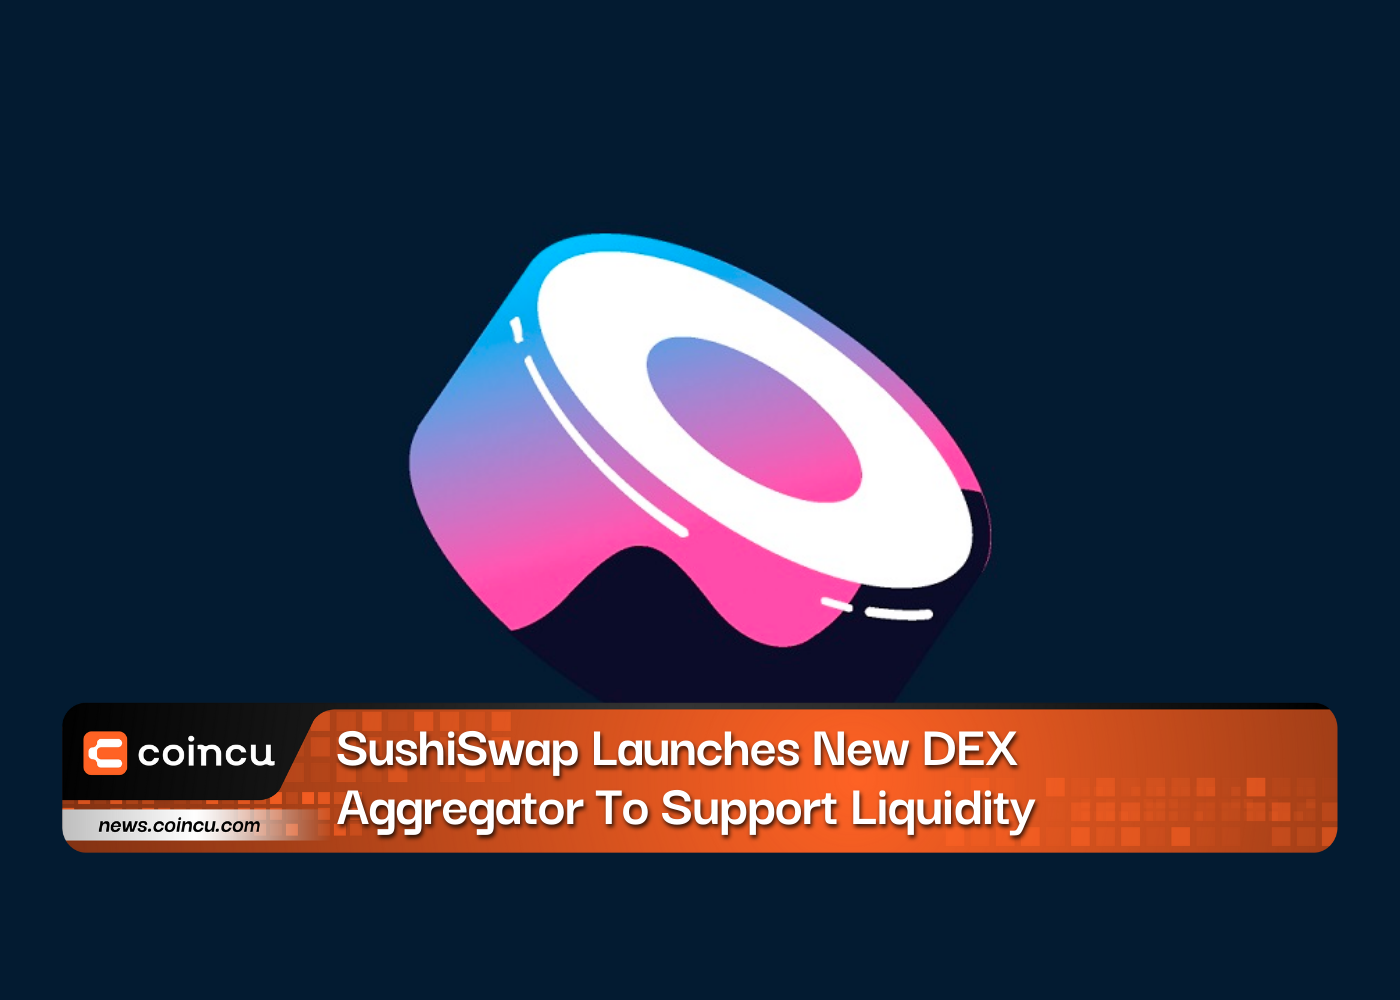 SushiSwap Launches New DEX Aggregator To Support Liquidity